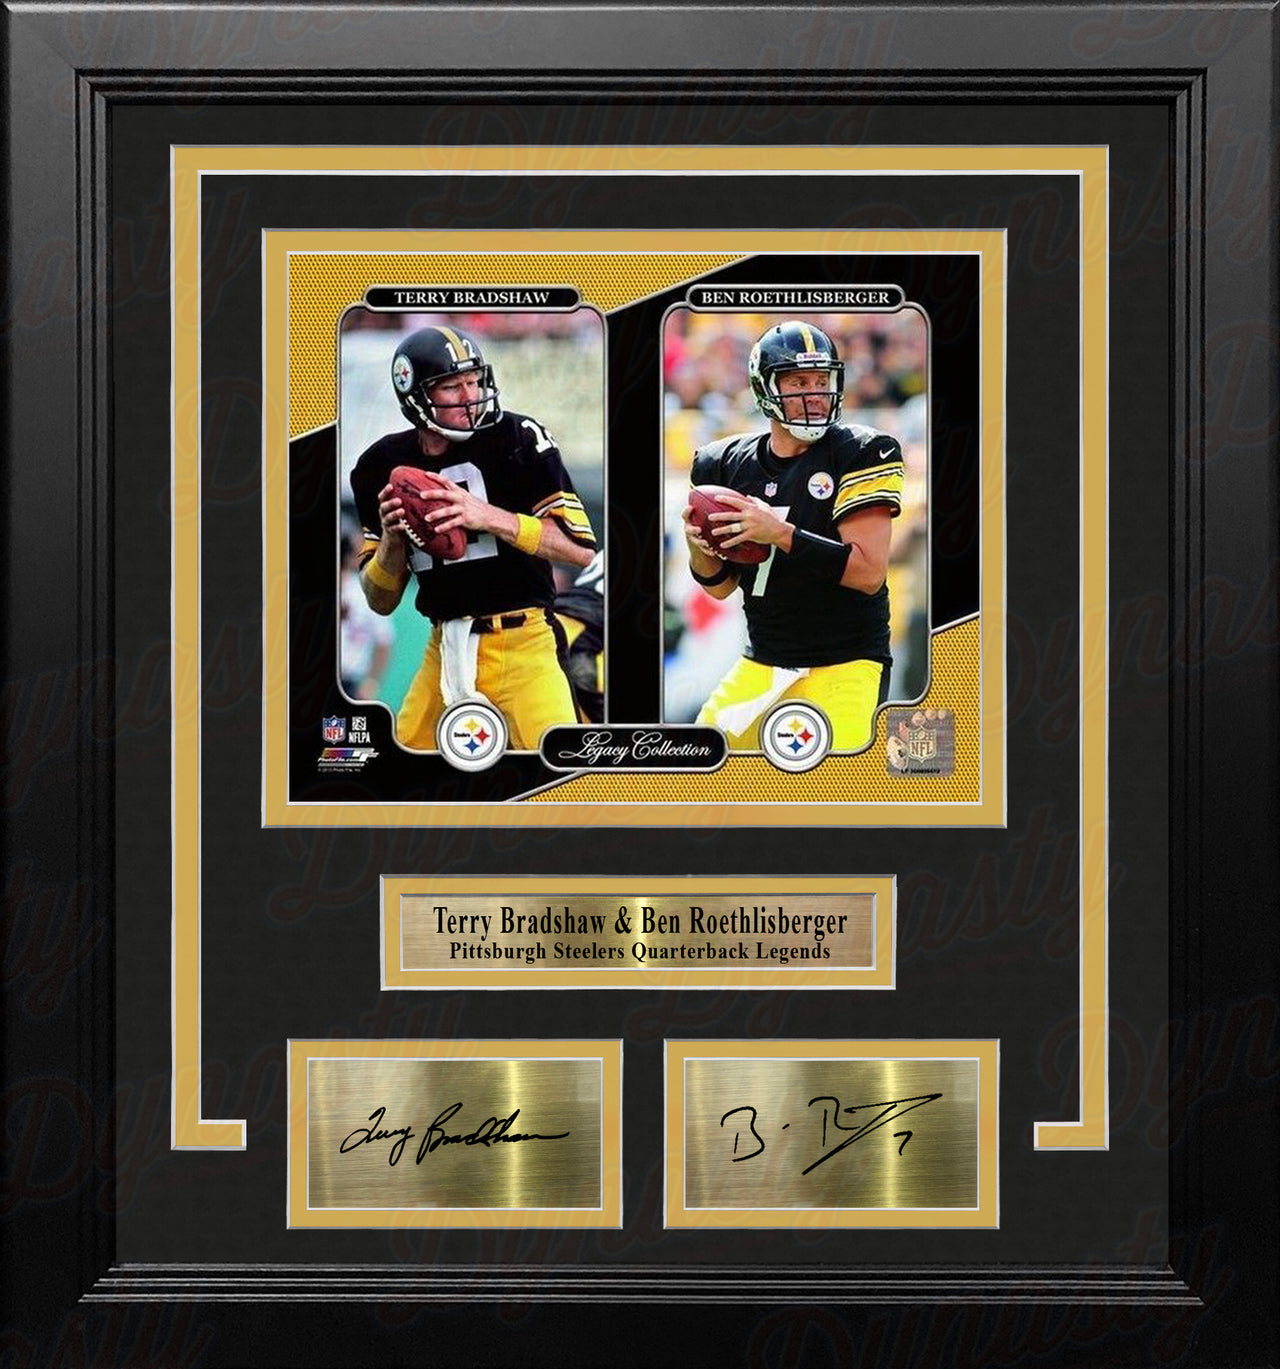 Terry Bradshaw & Ben Roethlisberger Pittsburgh Steelers 8x10 Framed Photo with Engraved Autographs